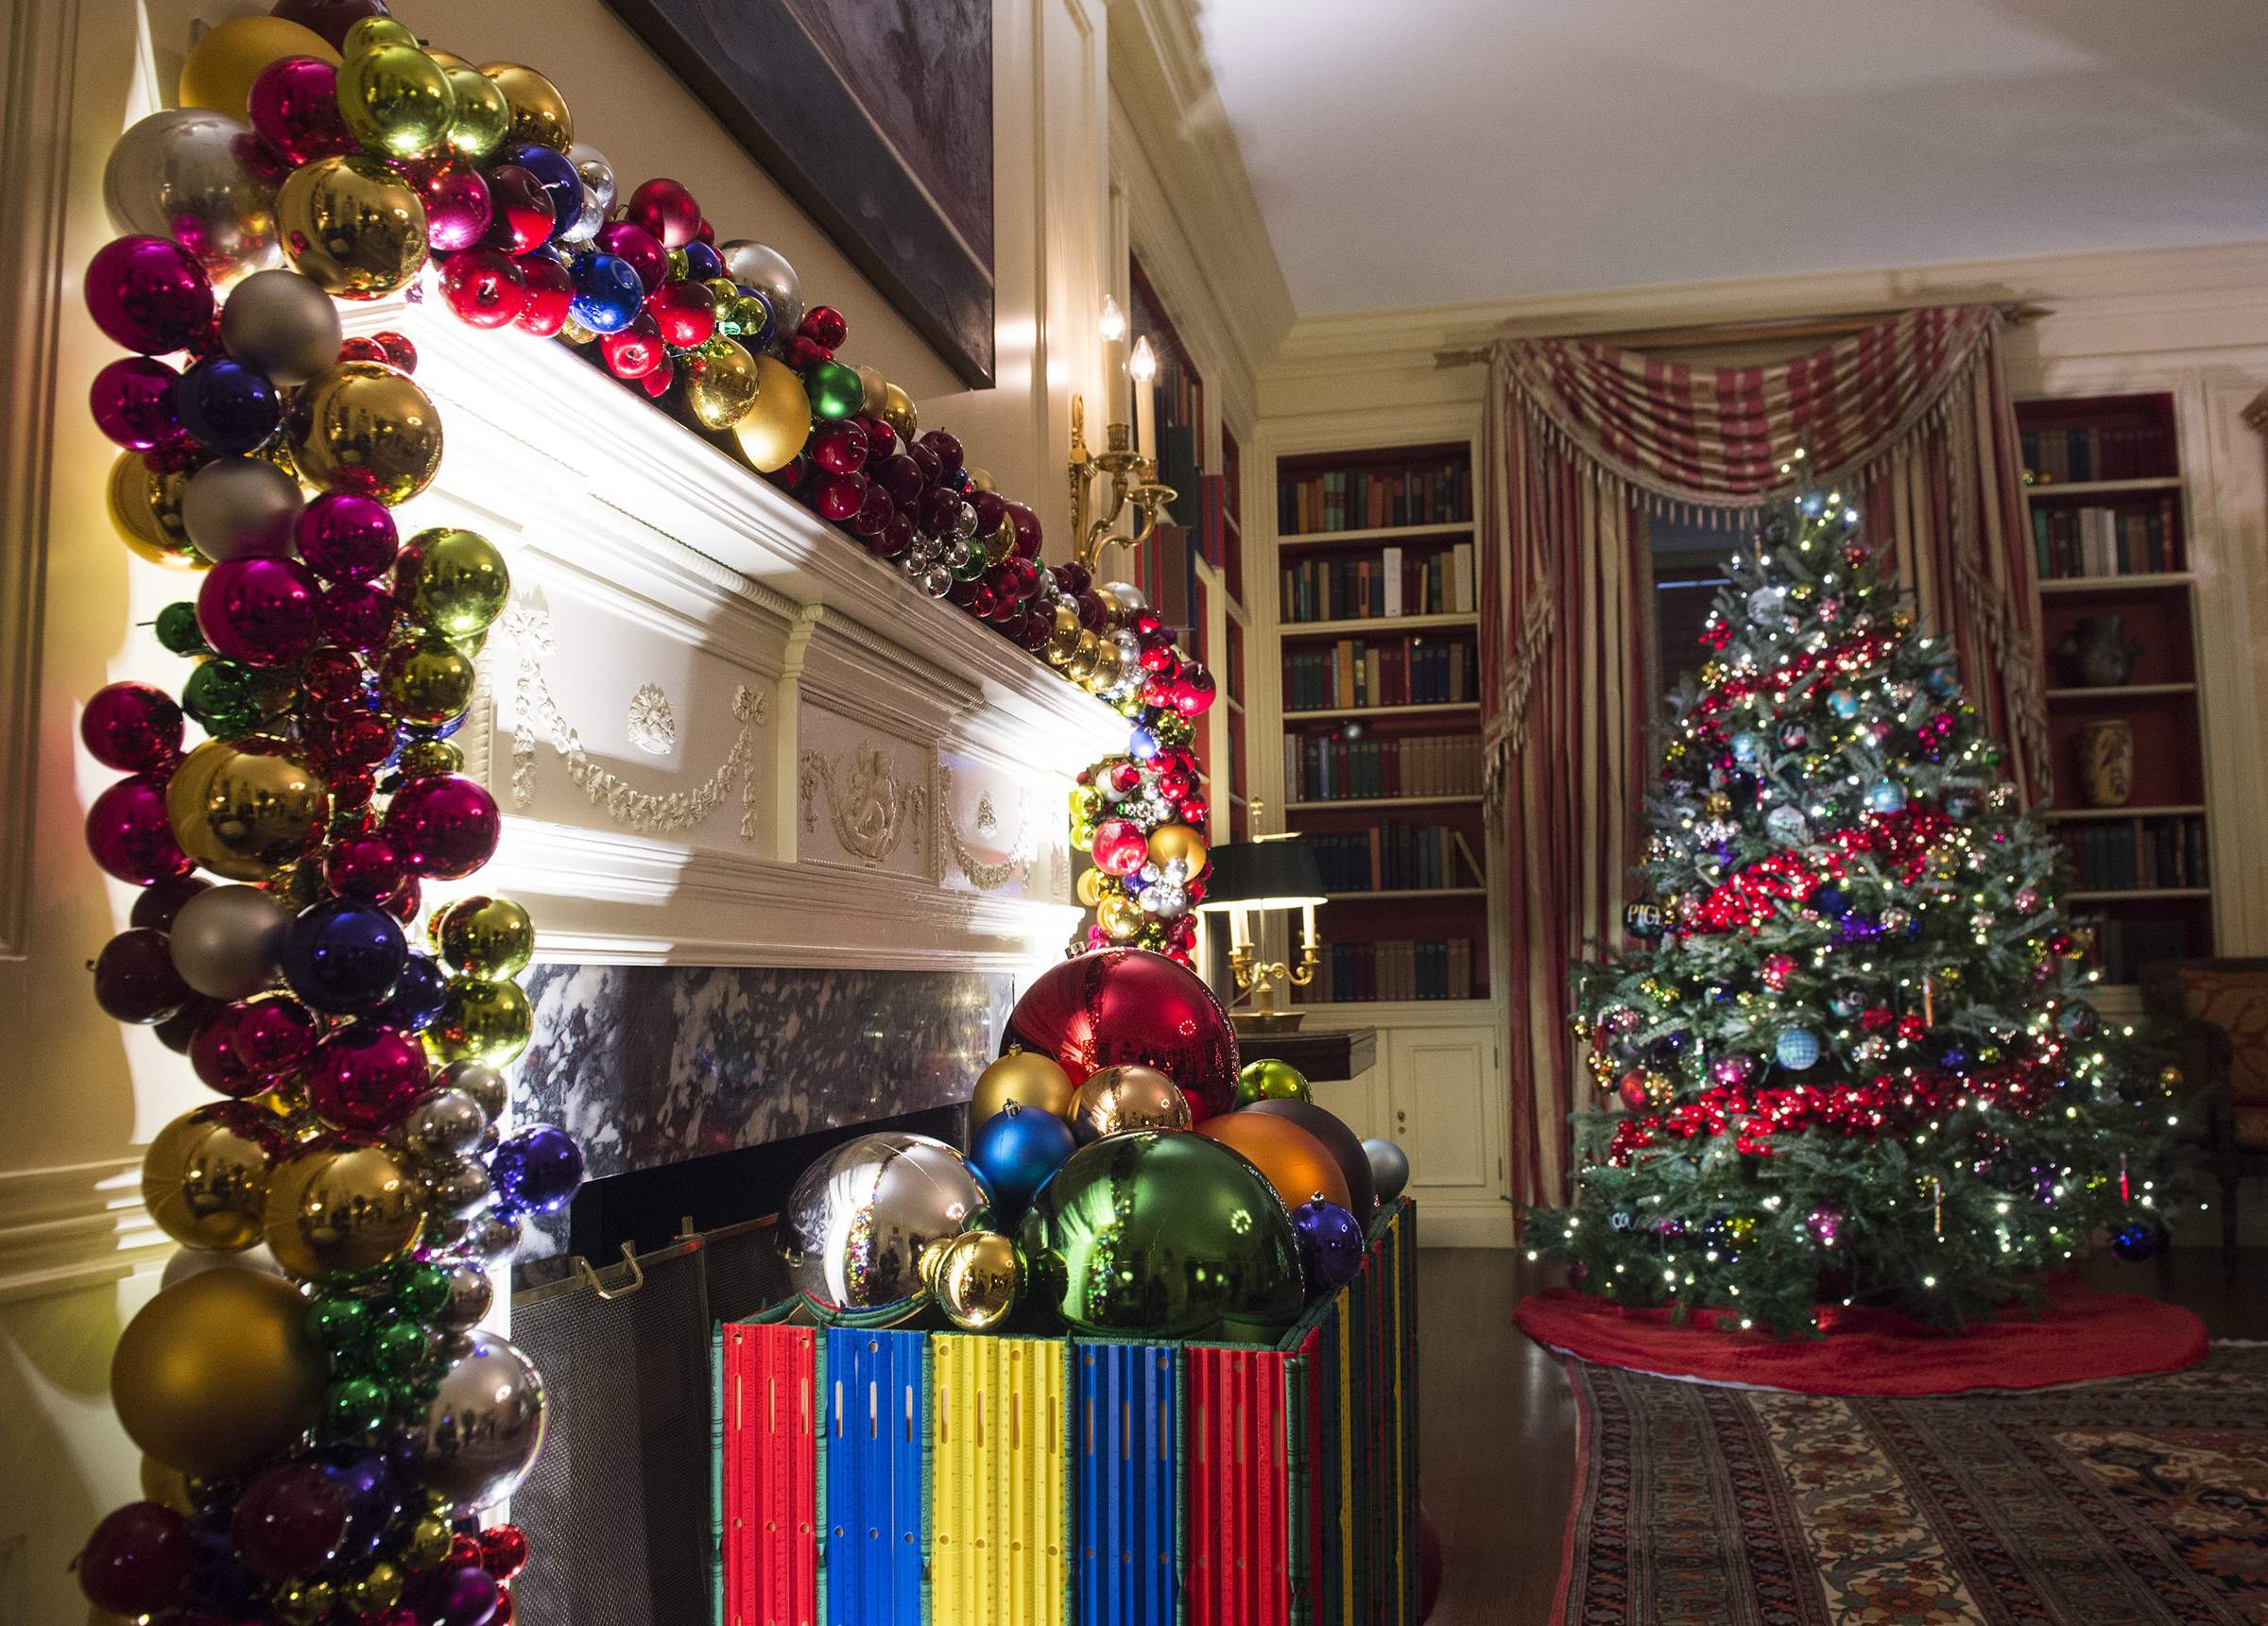 Christmas trees and holiday decorations in the theme of, "The Gift of the Holidays," are seen in the Library of the White House in Washington, D.c. on Nov. 29, 2016. (Saul Loeb—AFP via Getty Images)